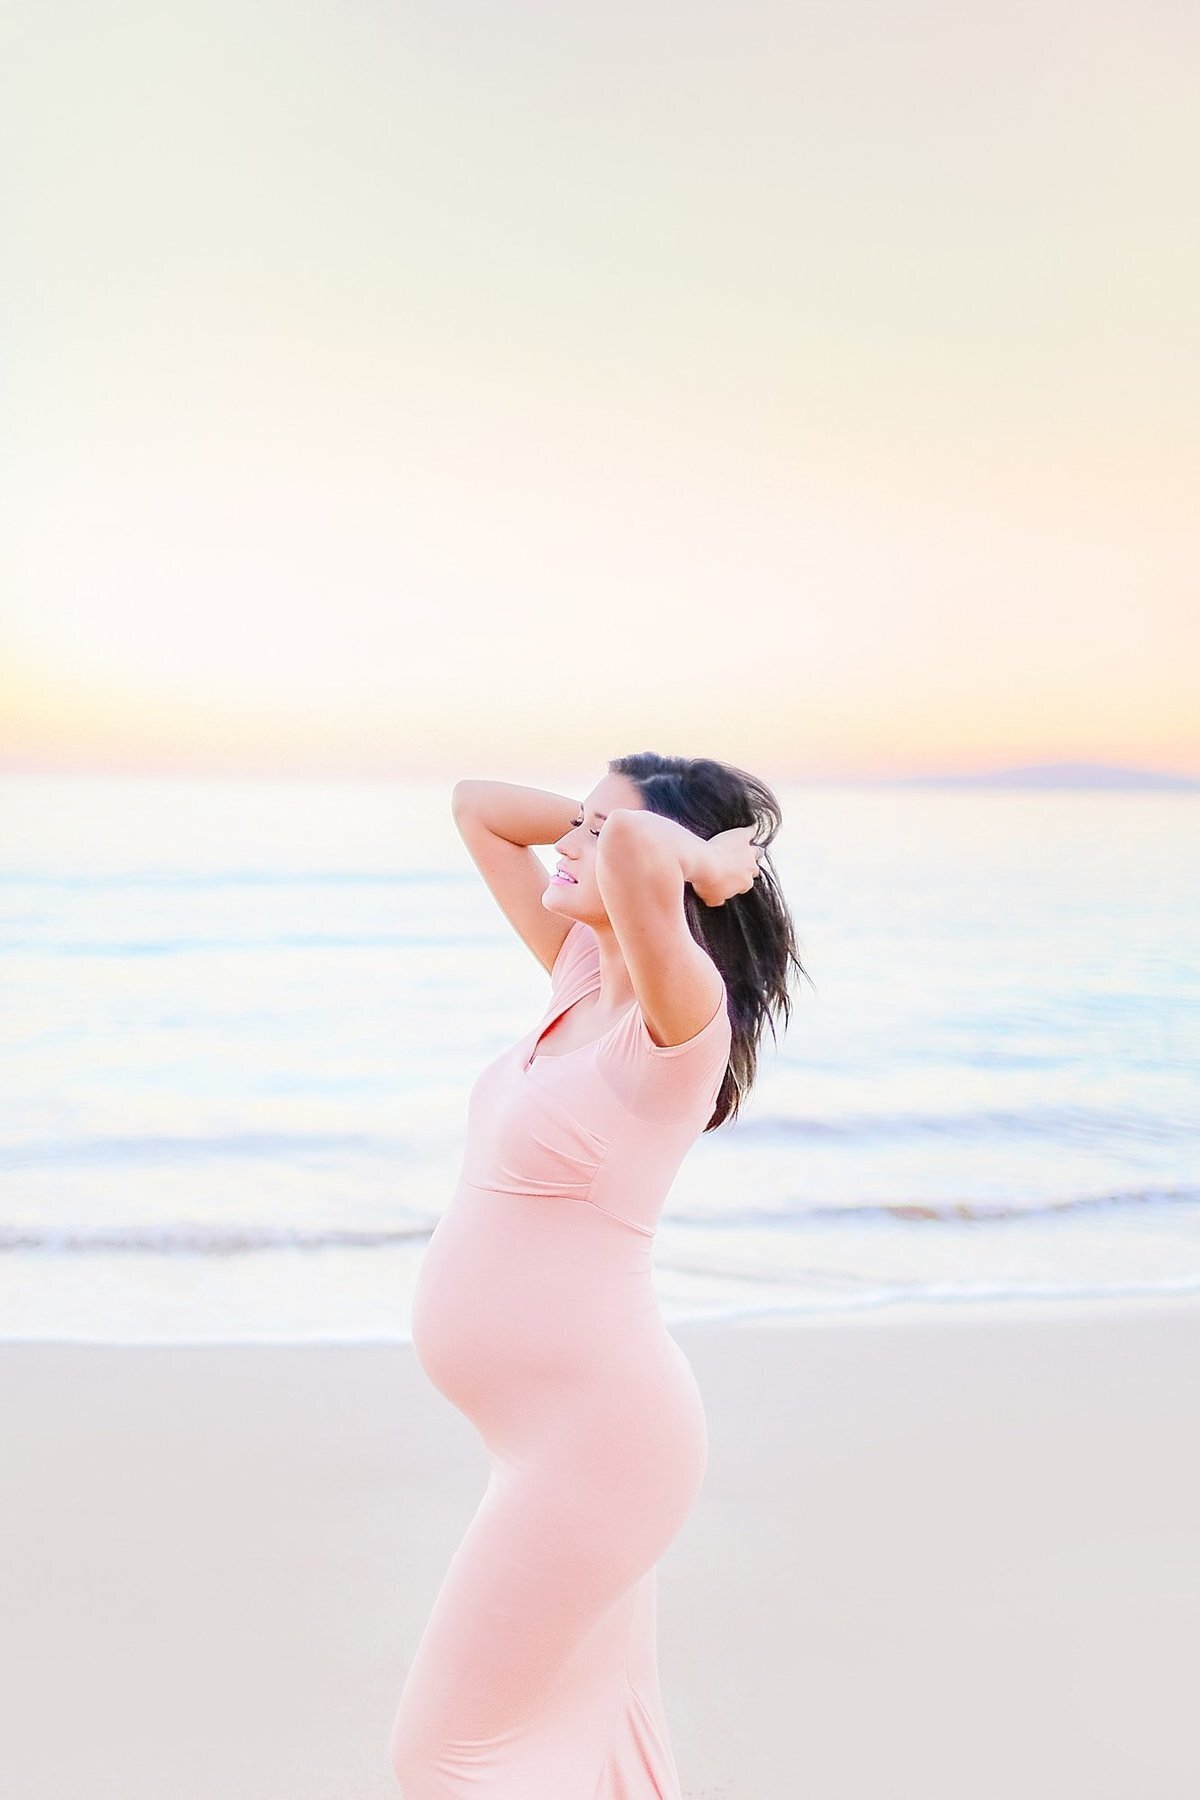 Jade Tolbert maternity portraits photographed in Wailea by Love + Water